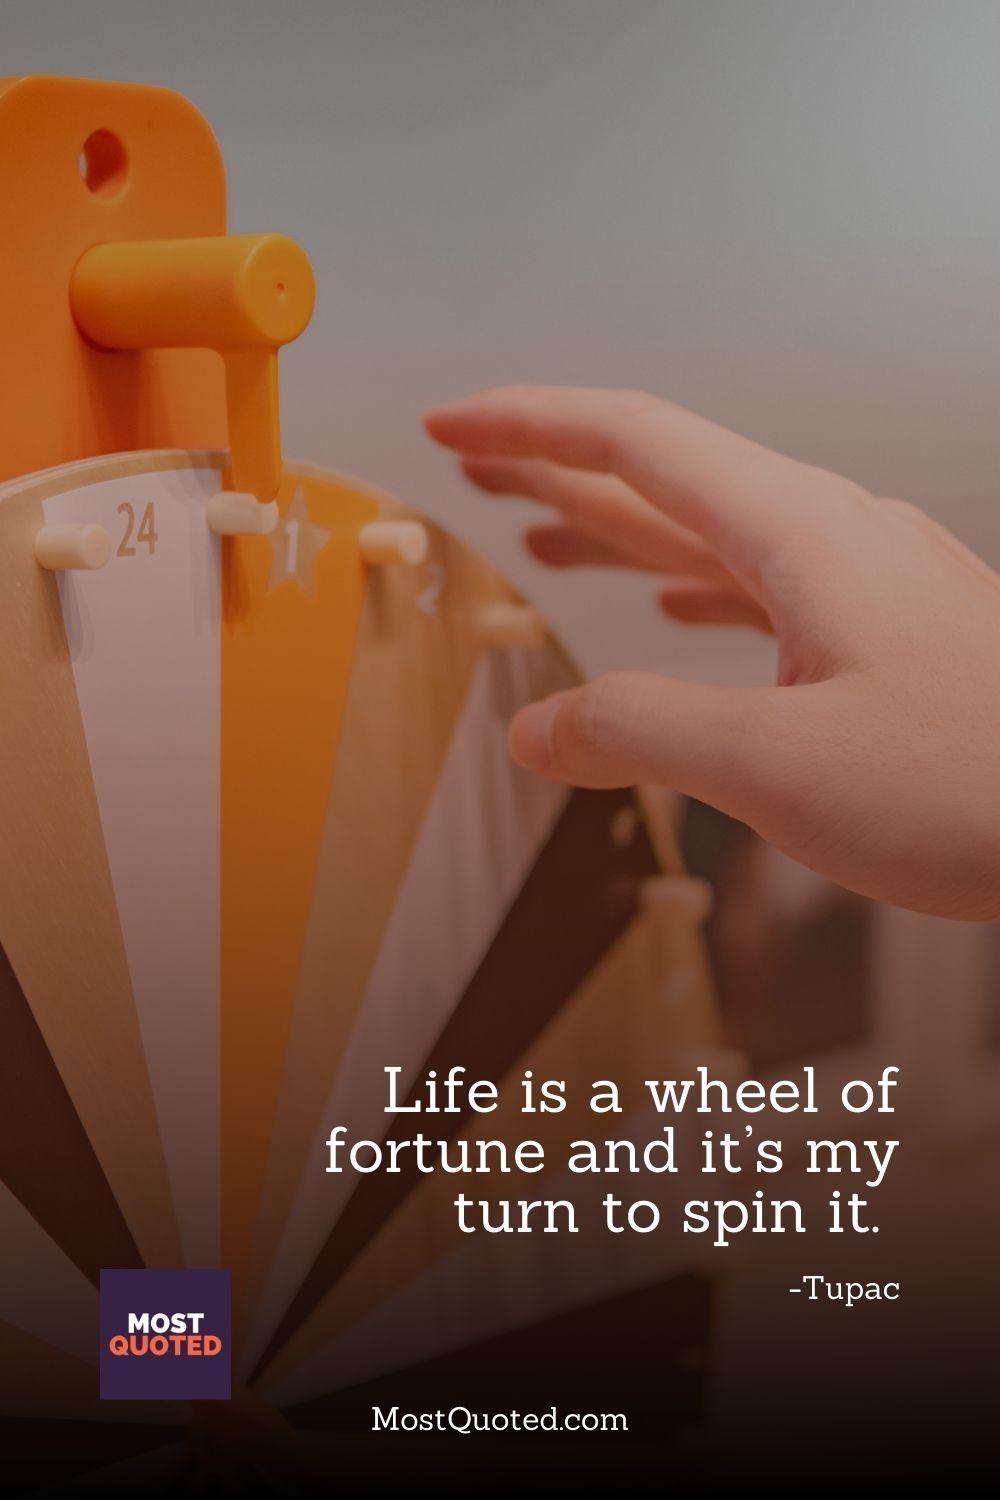 Life is a wheel of fortune and it’s my turn to spin it. - Tupac